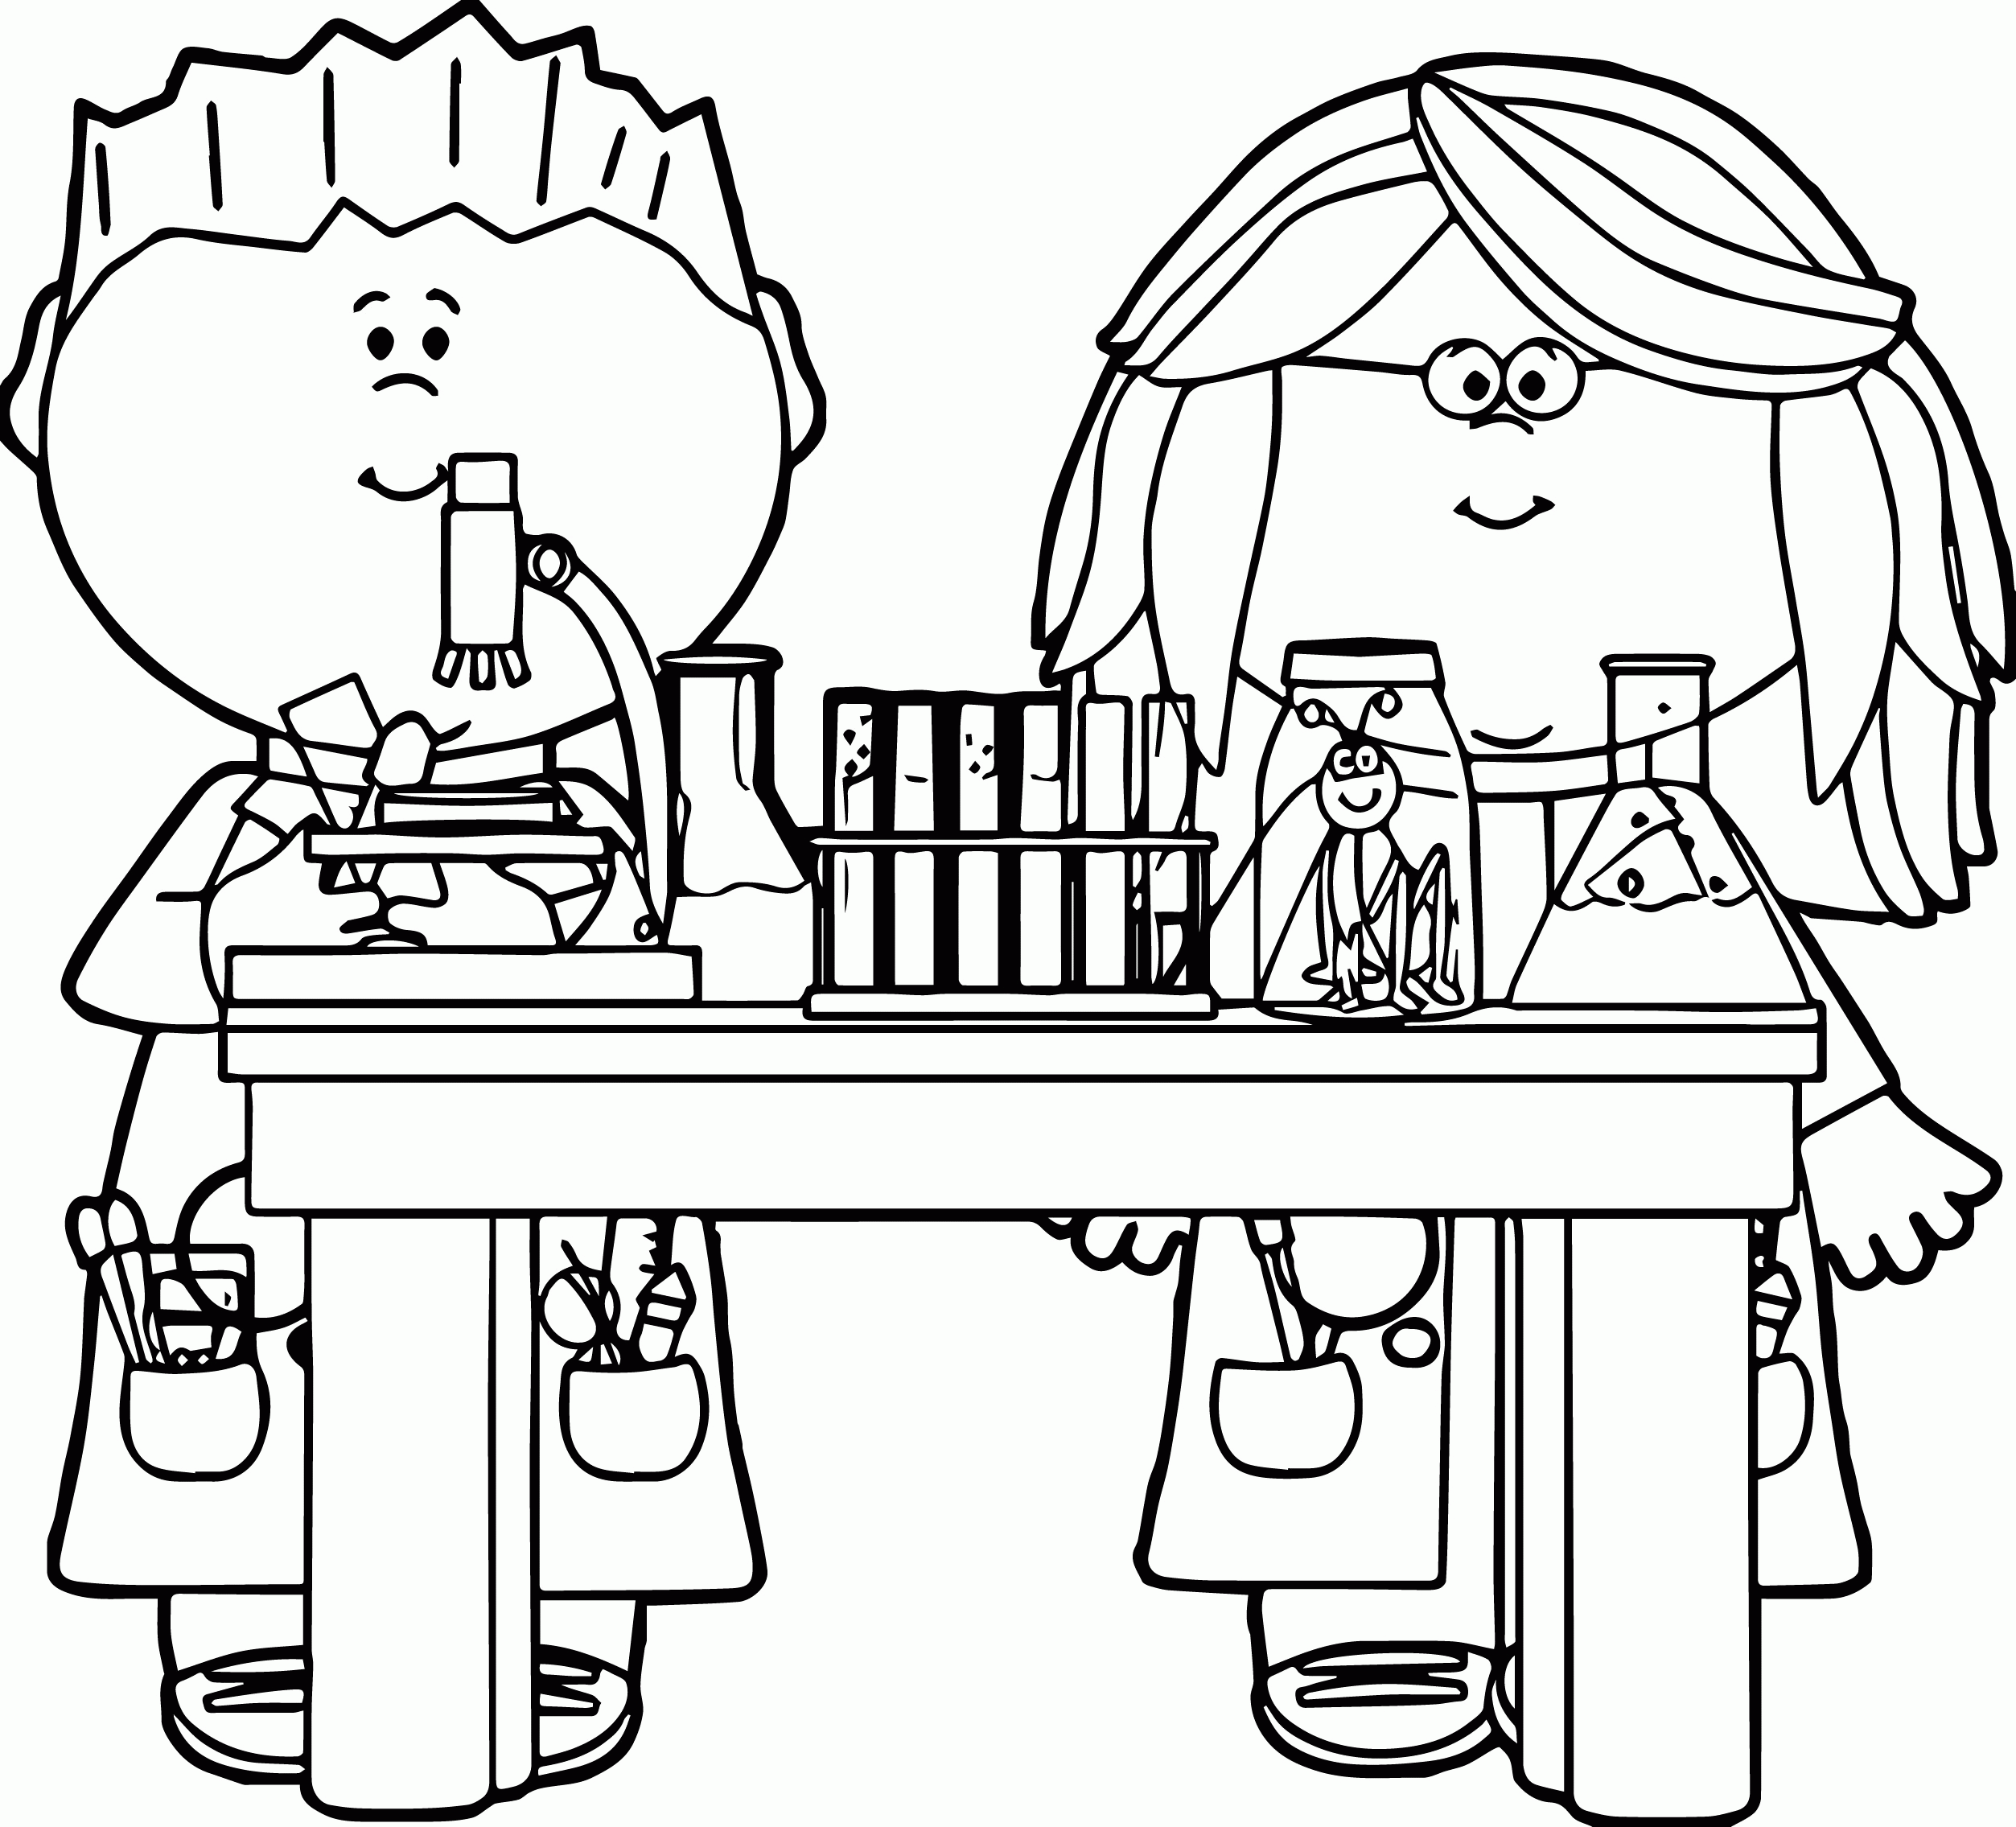 science coloring pages science coloring pages to download and print for free coloring science pages 